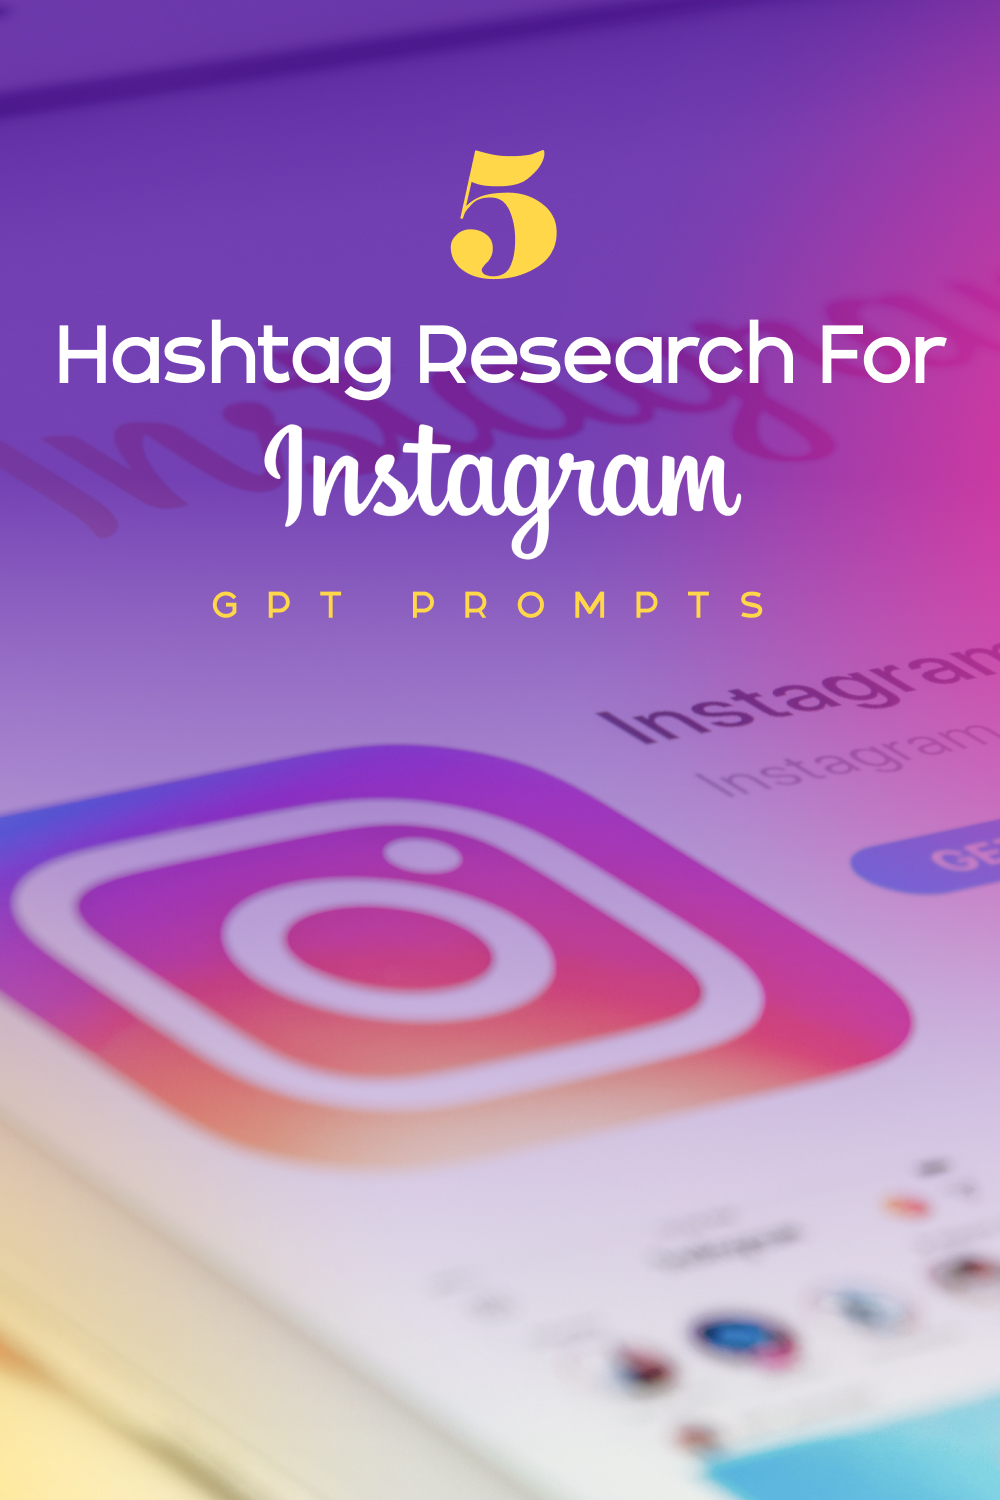 5 hashtag research for instagram 1 676